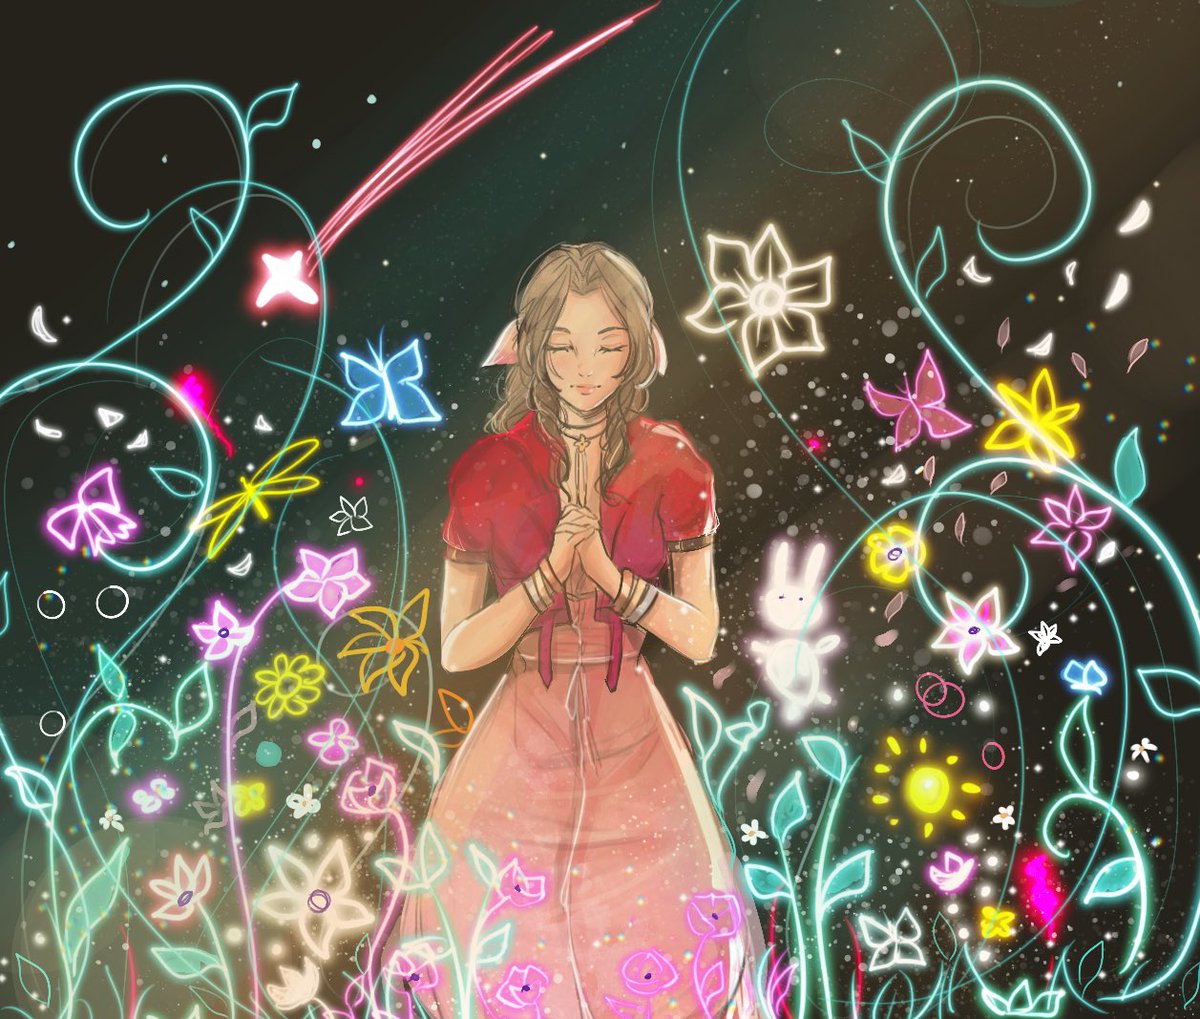 “What if we went on an adventure?” #FF7Rebirth #Aerith